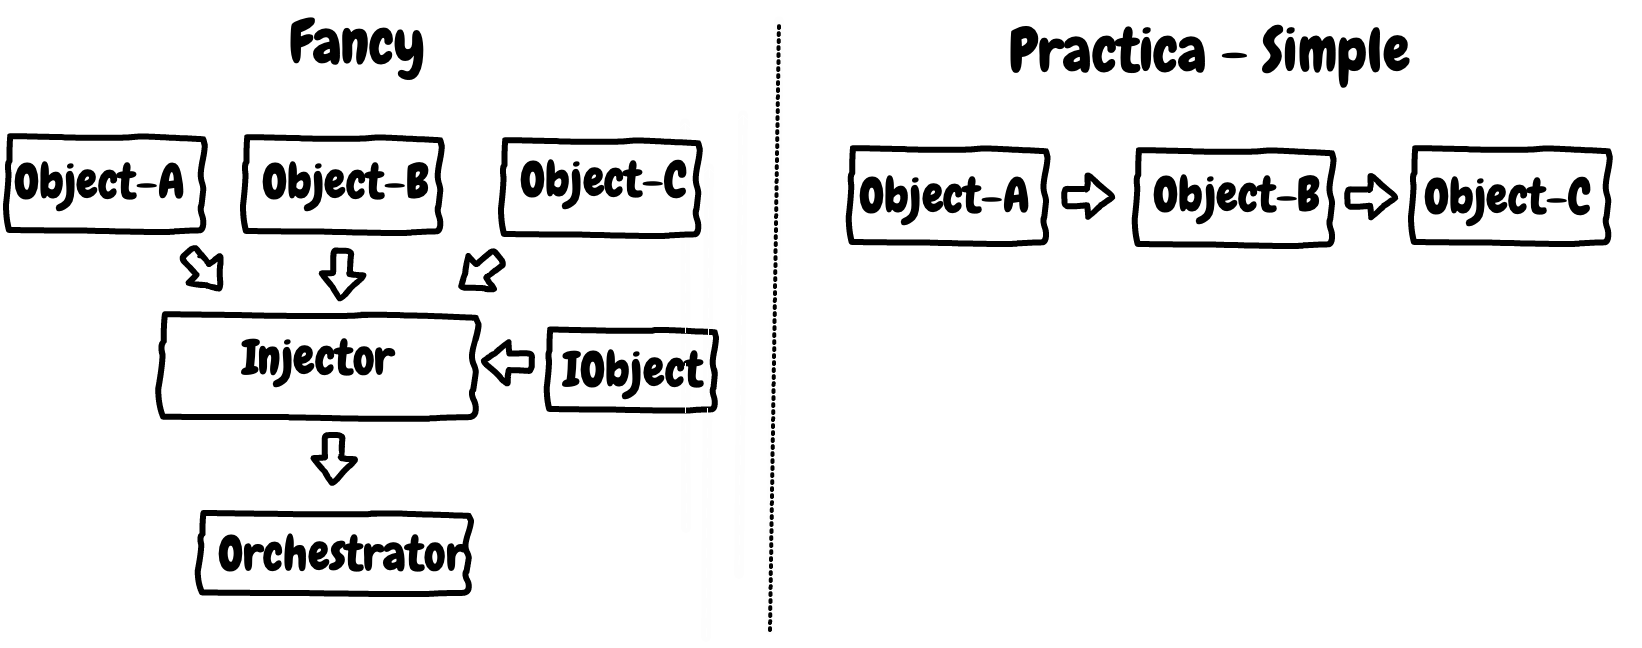 abstractions-vs-simplicity.png